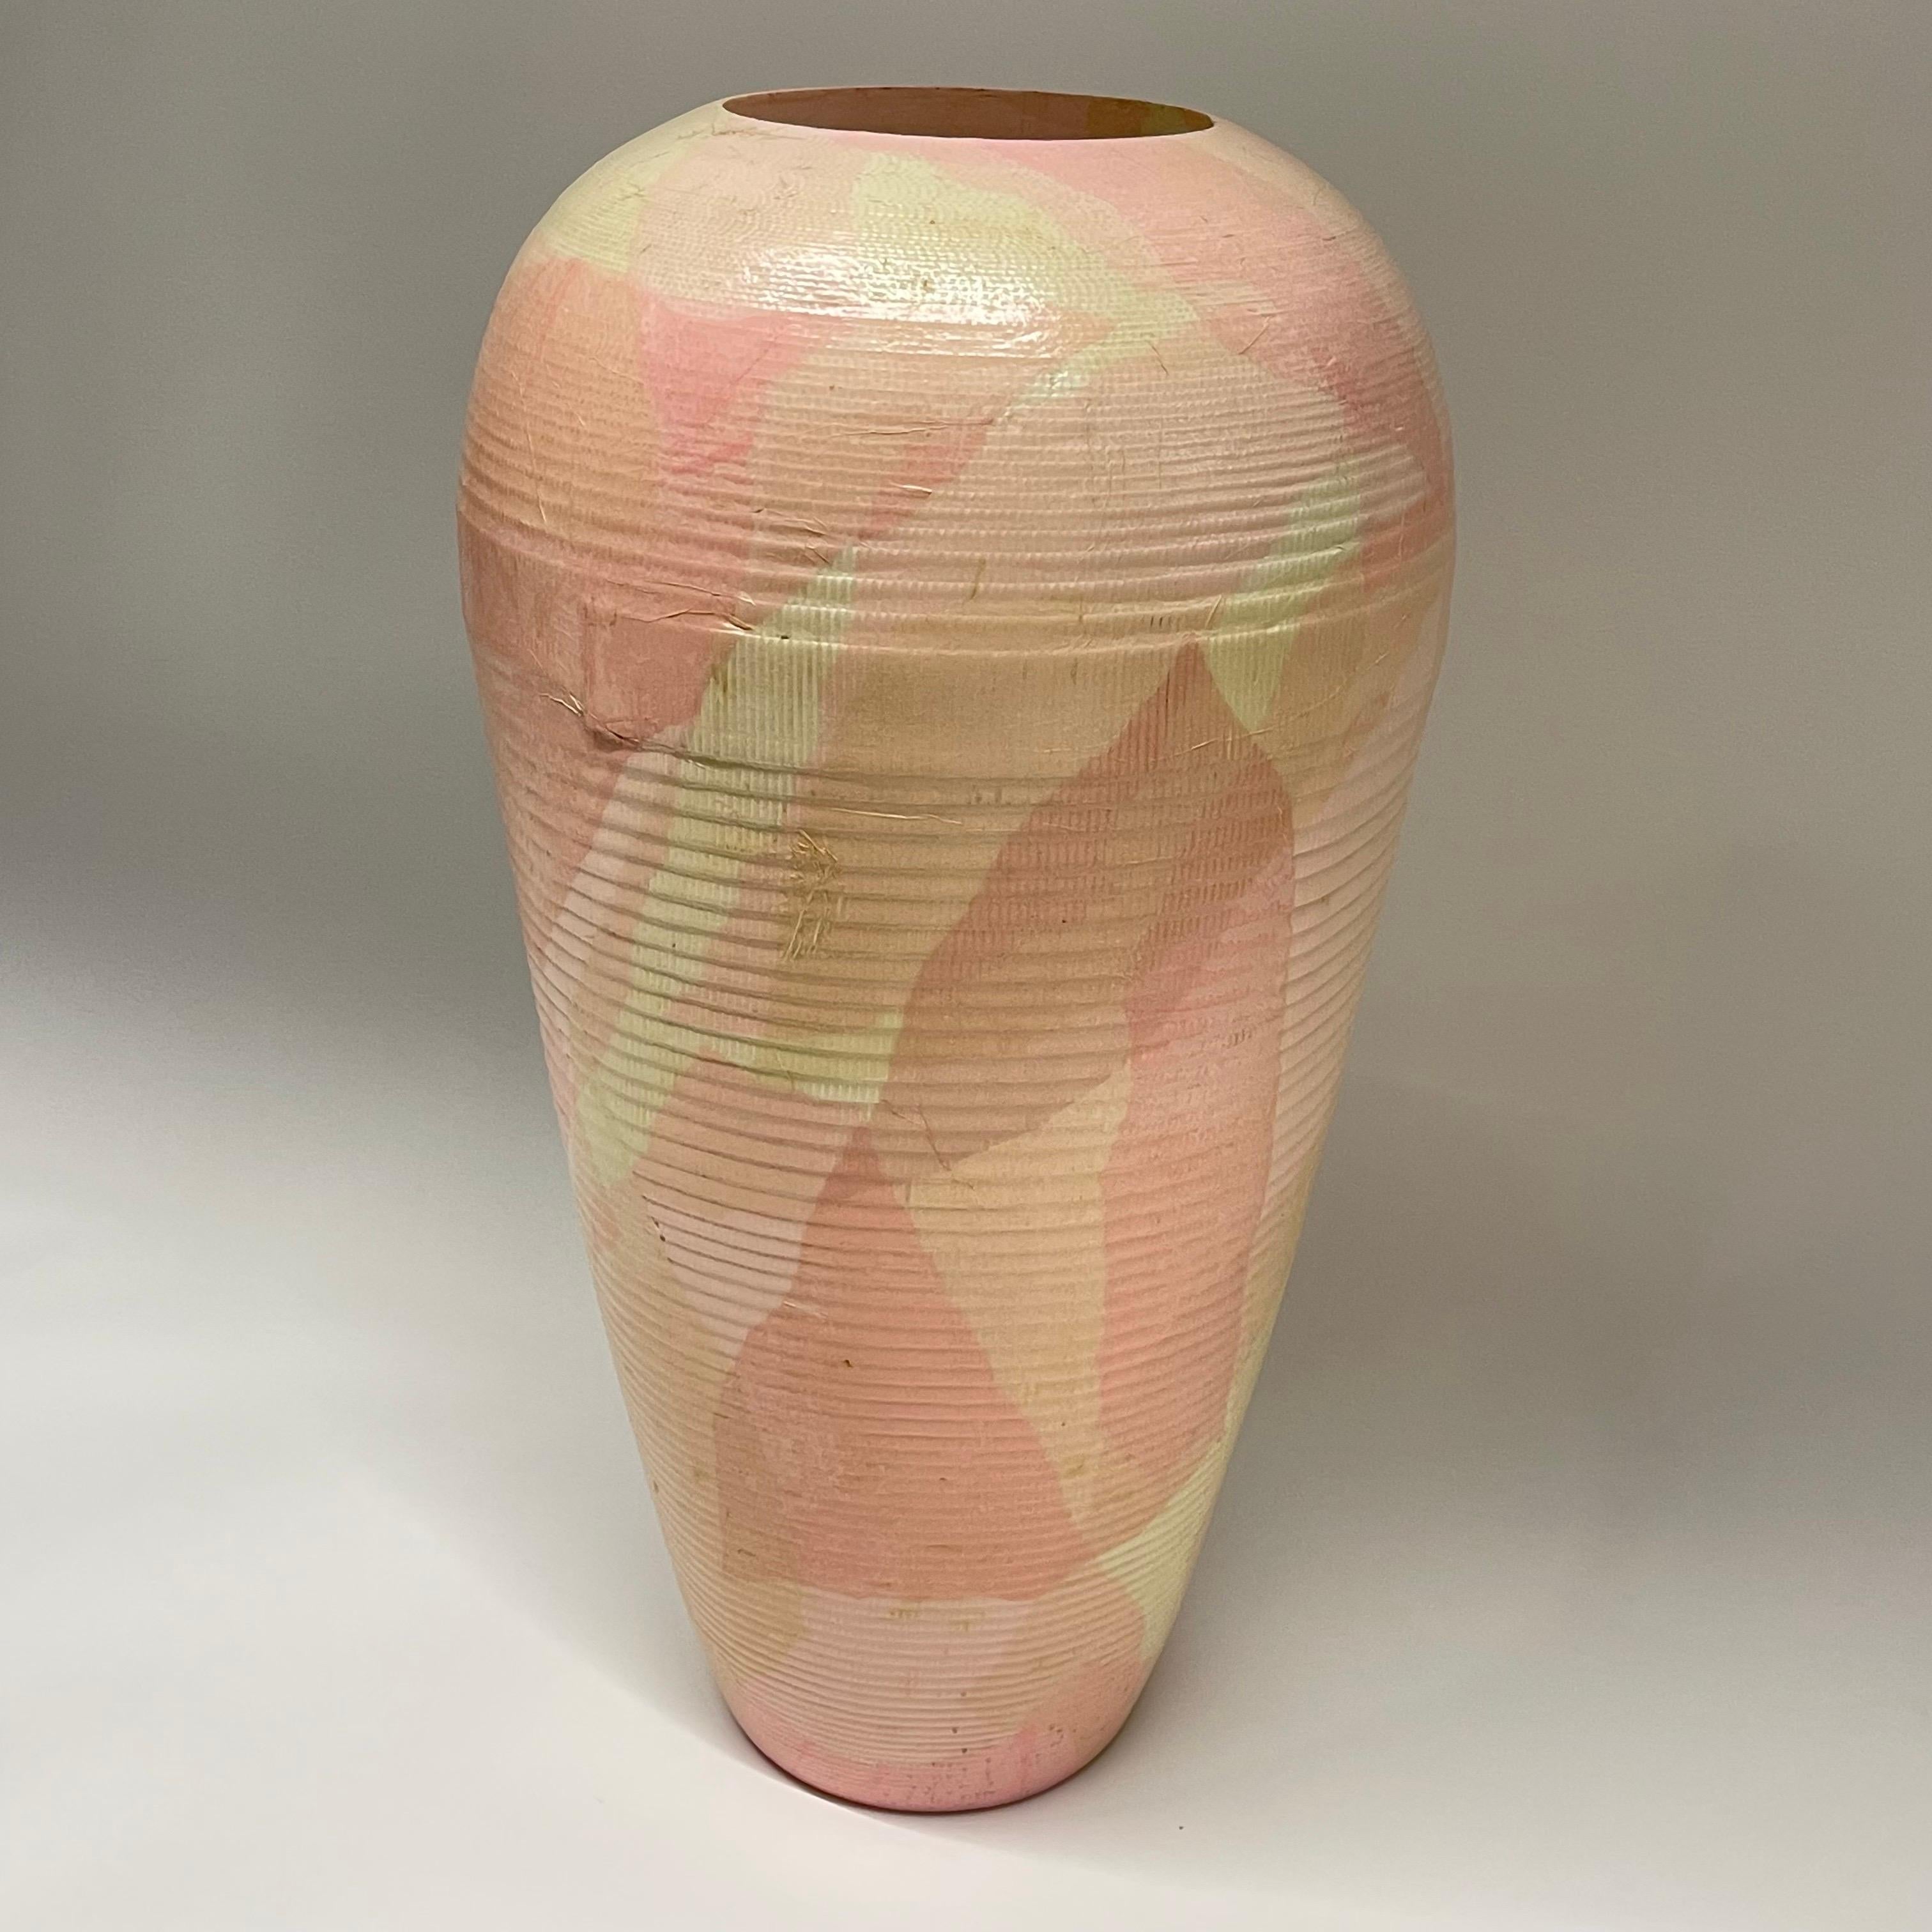 Post-Modern Post Modern Hand Painted Corrugated Cardboard Vase by Flute, Chicago, c 1989 For Sale